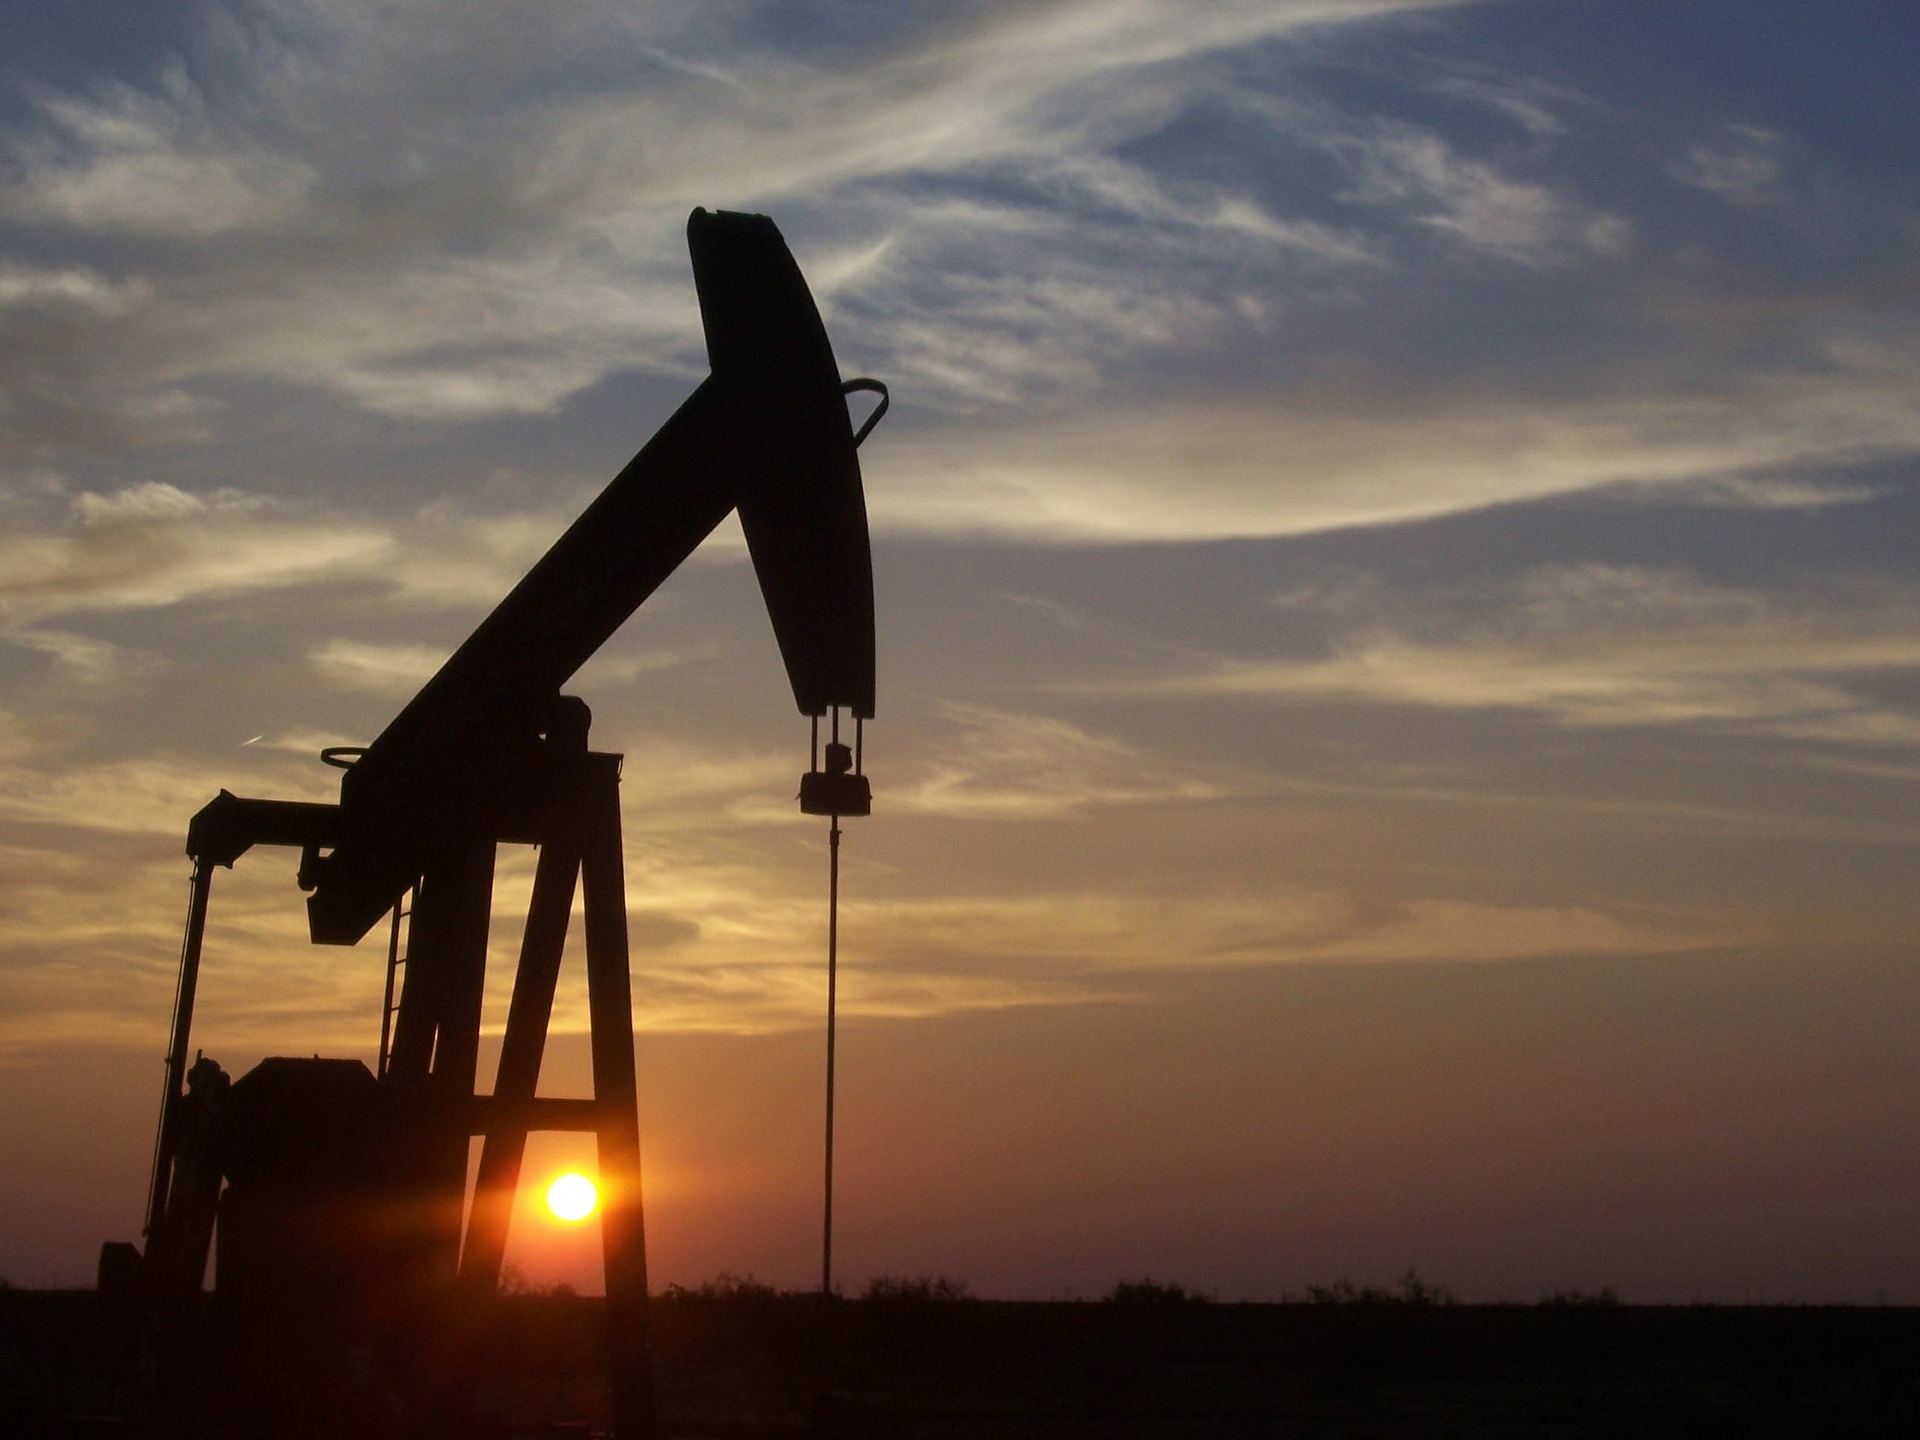 Falling Oil Prices Renew High-Yield, Junk Bond ETF Concerns